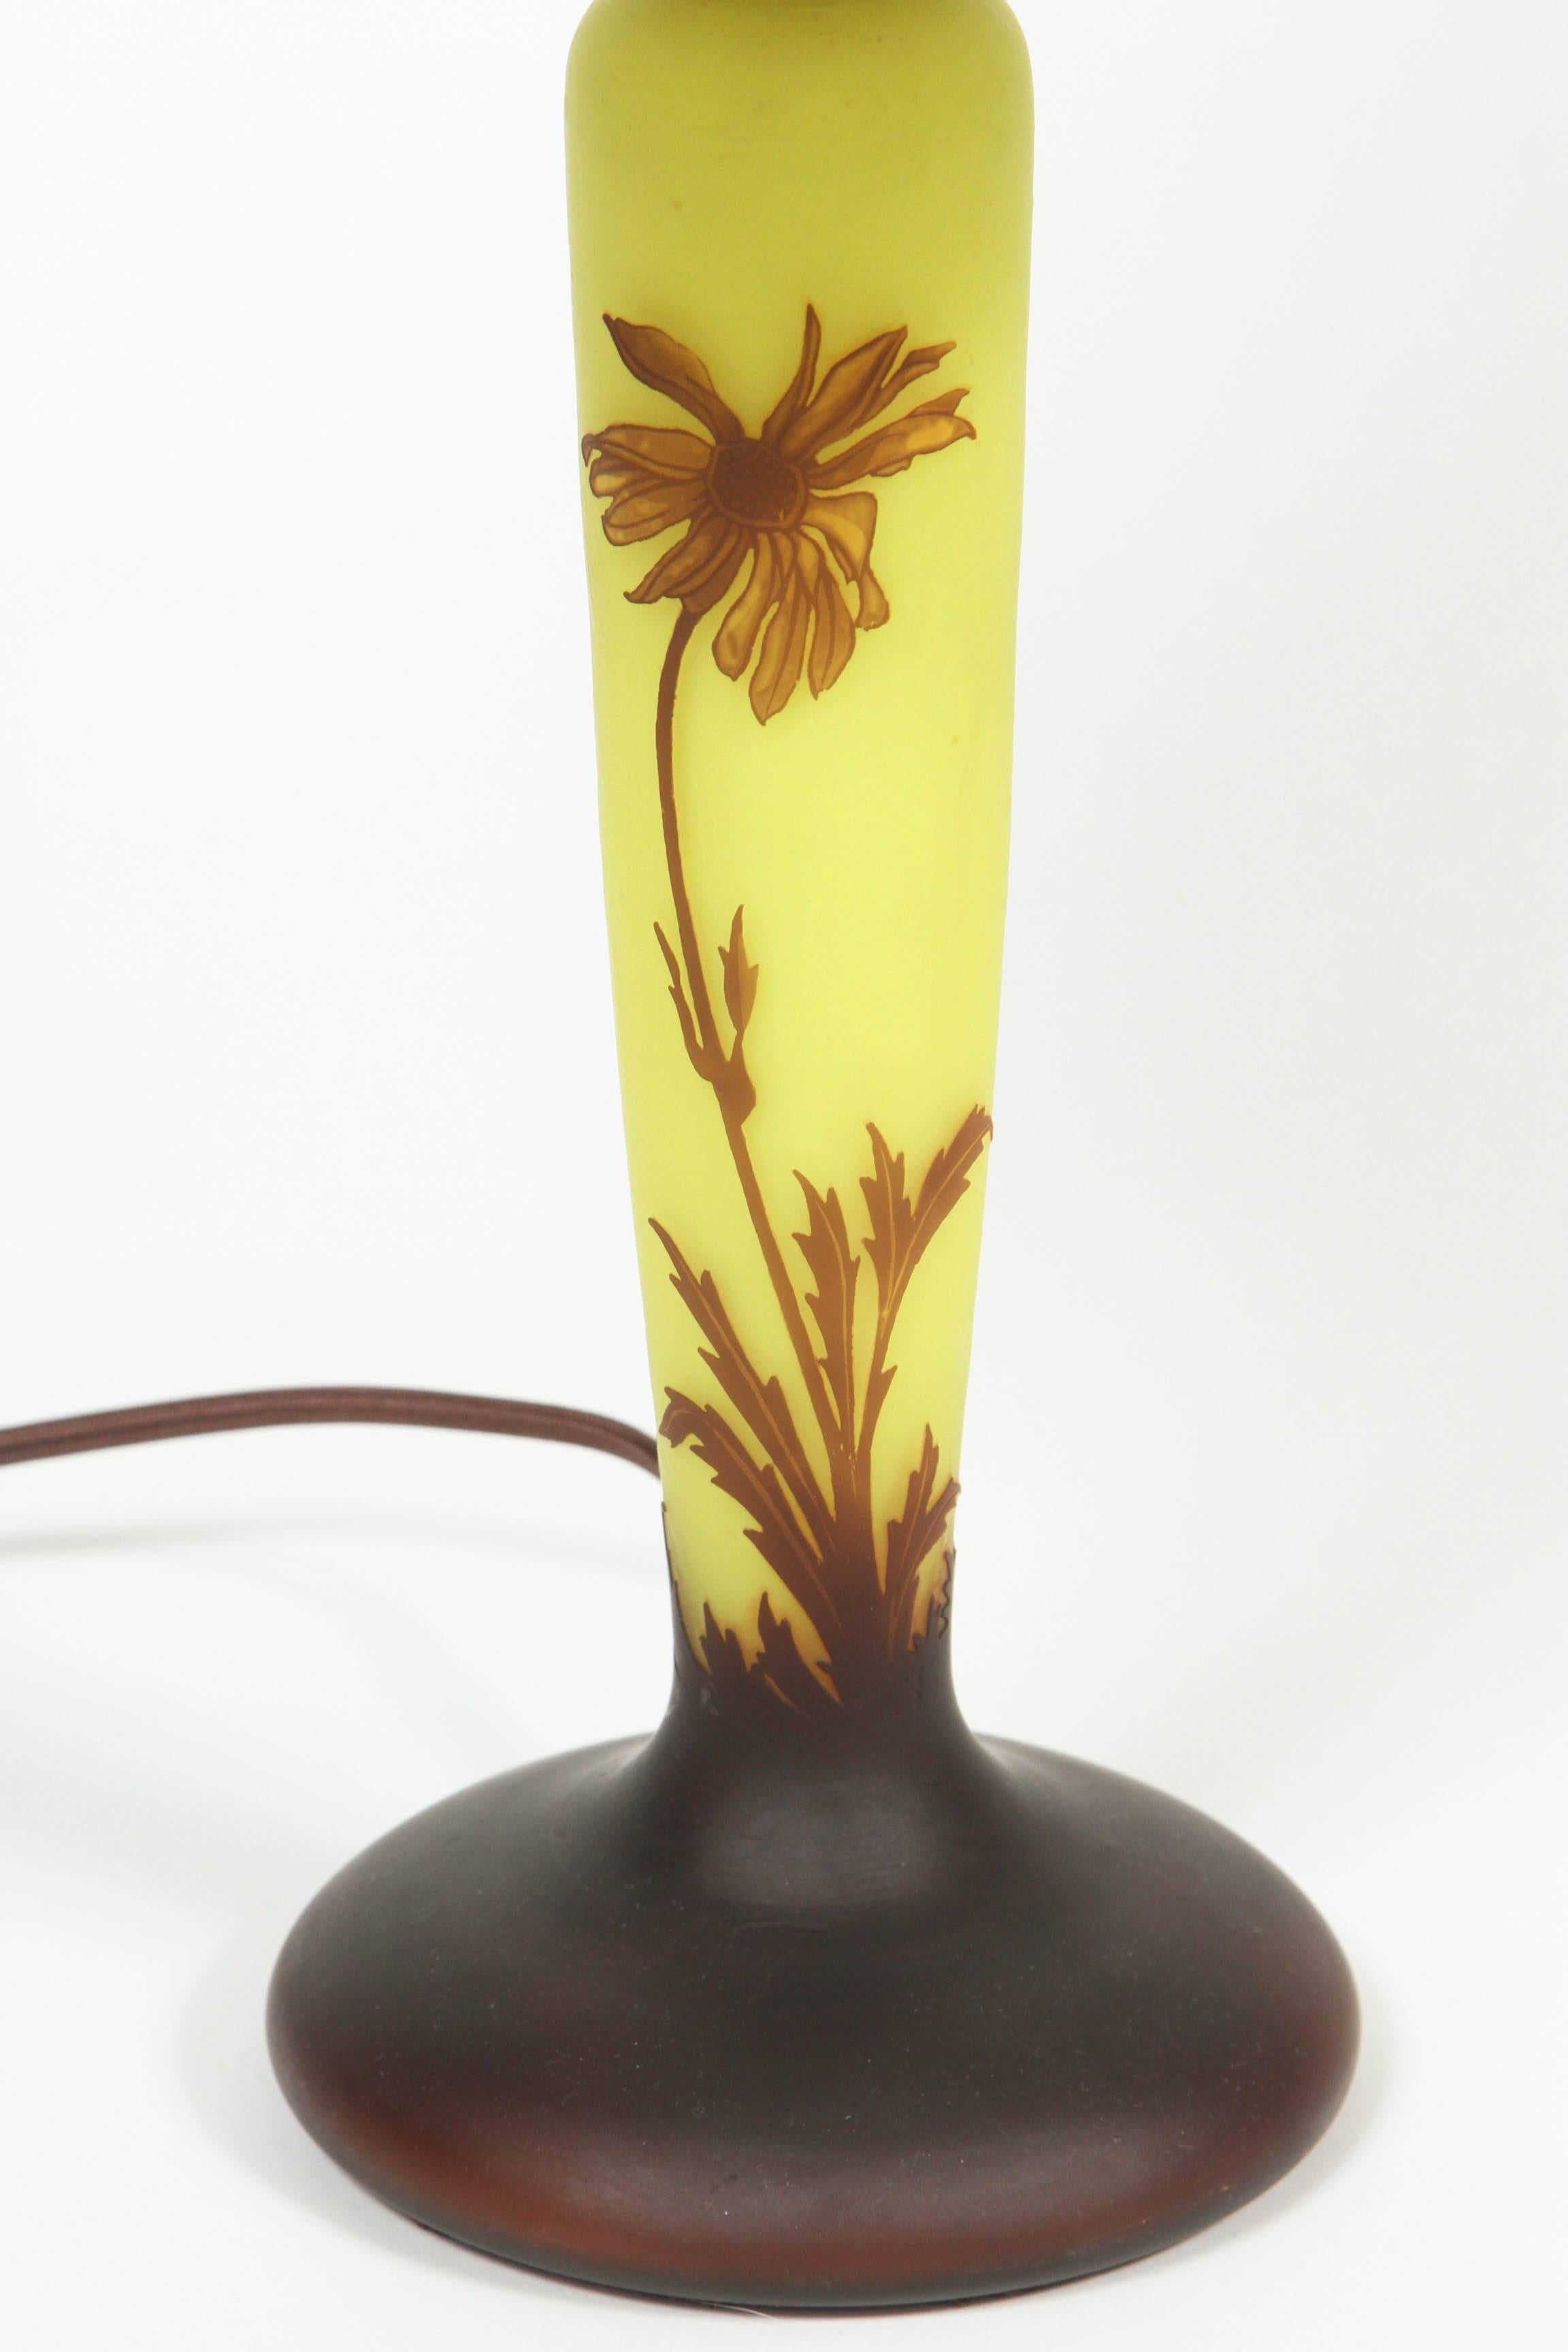 Newly rewired antique yellow and brown cameo glass lamp with custom-made shade. 

Diameter of shade: Top 8.25